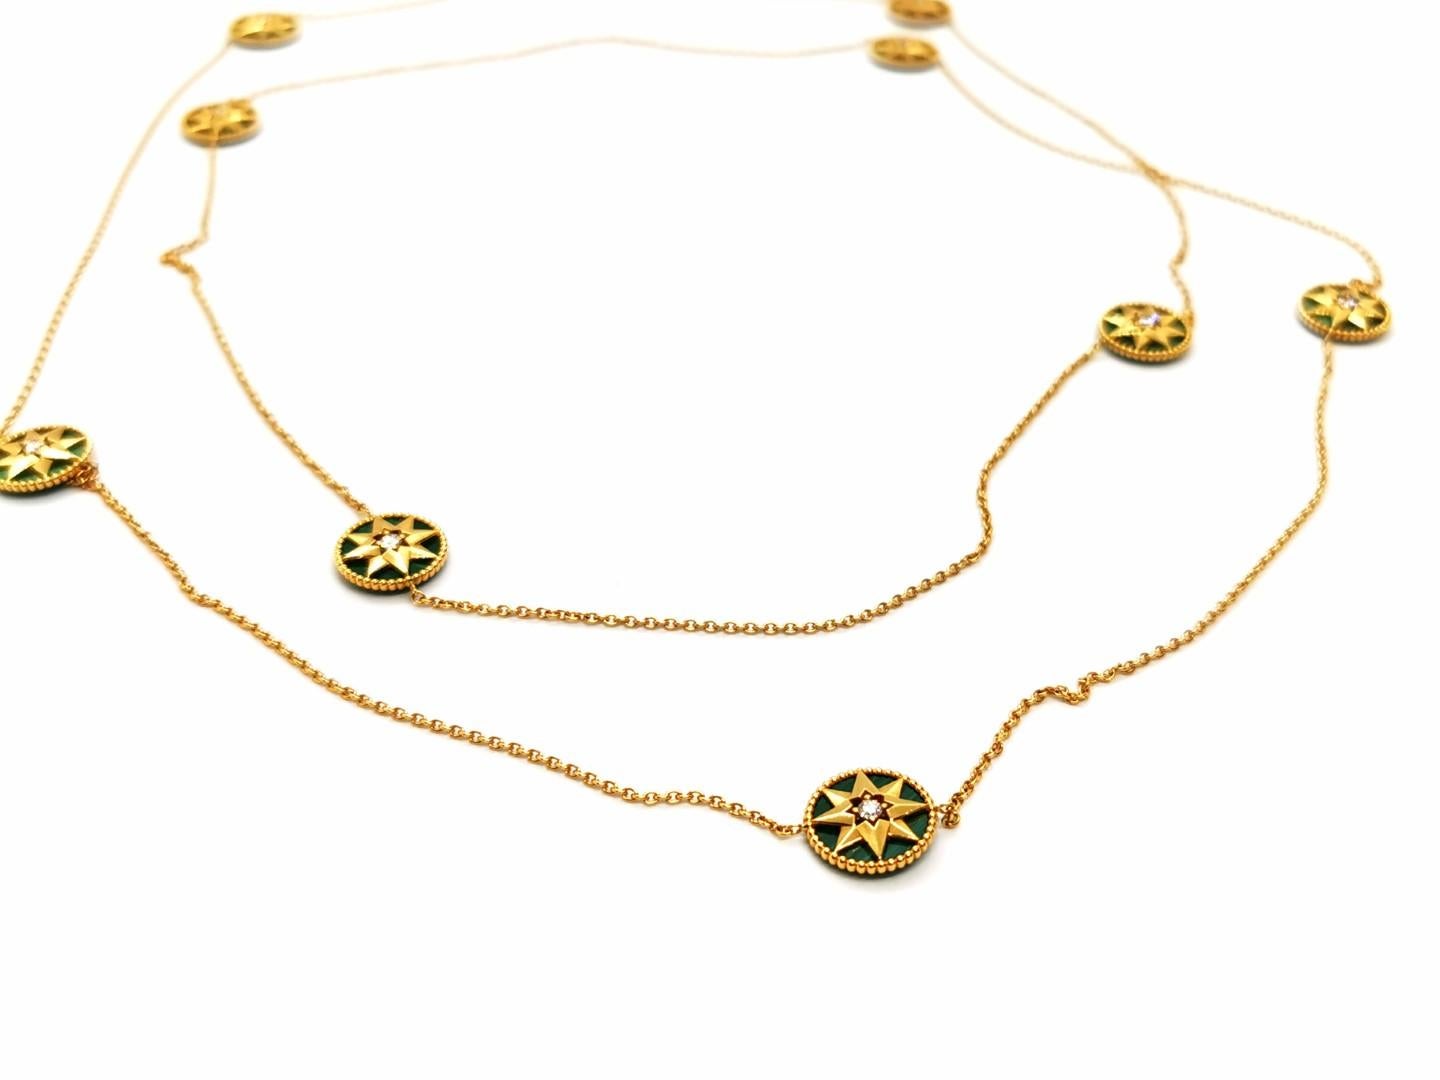 Dior Chain Necklace Rose Des Vents Yellow Gold Diamond 11